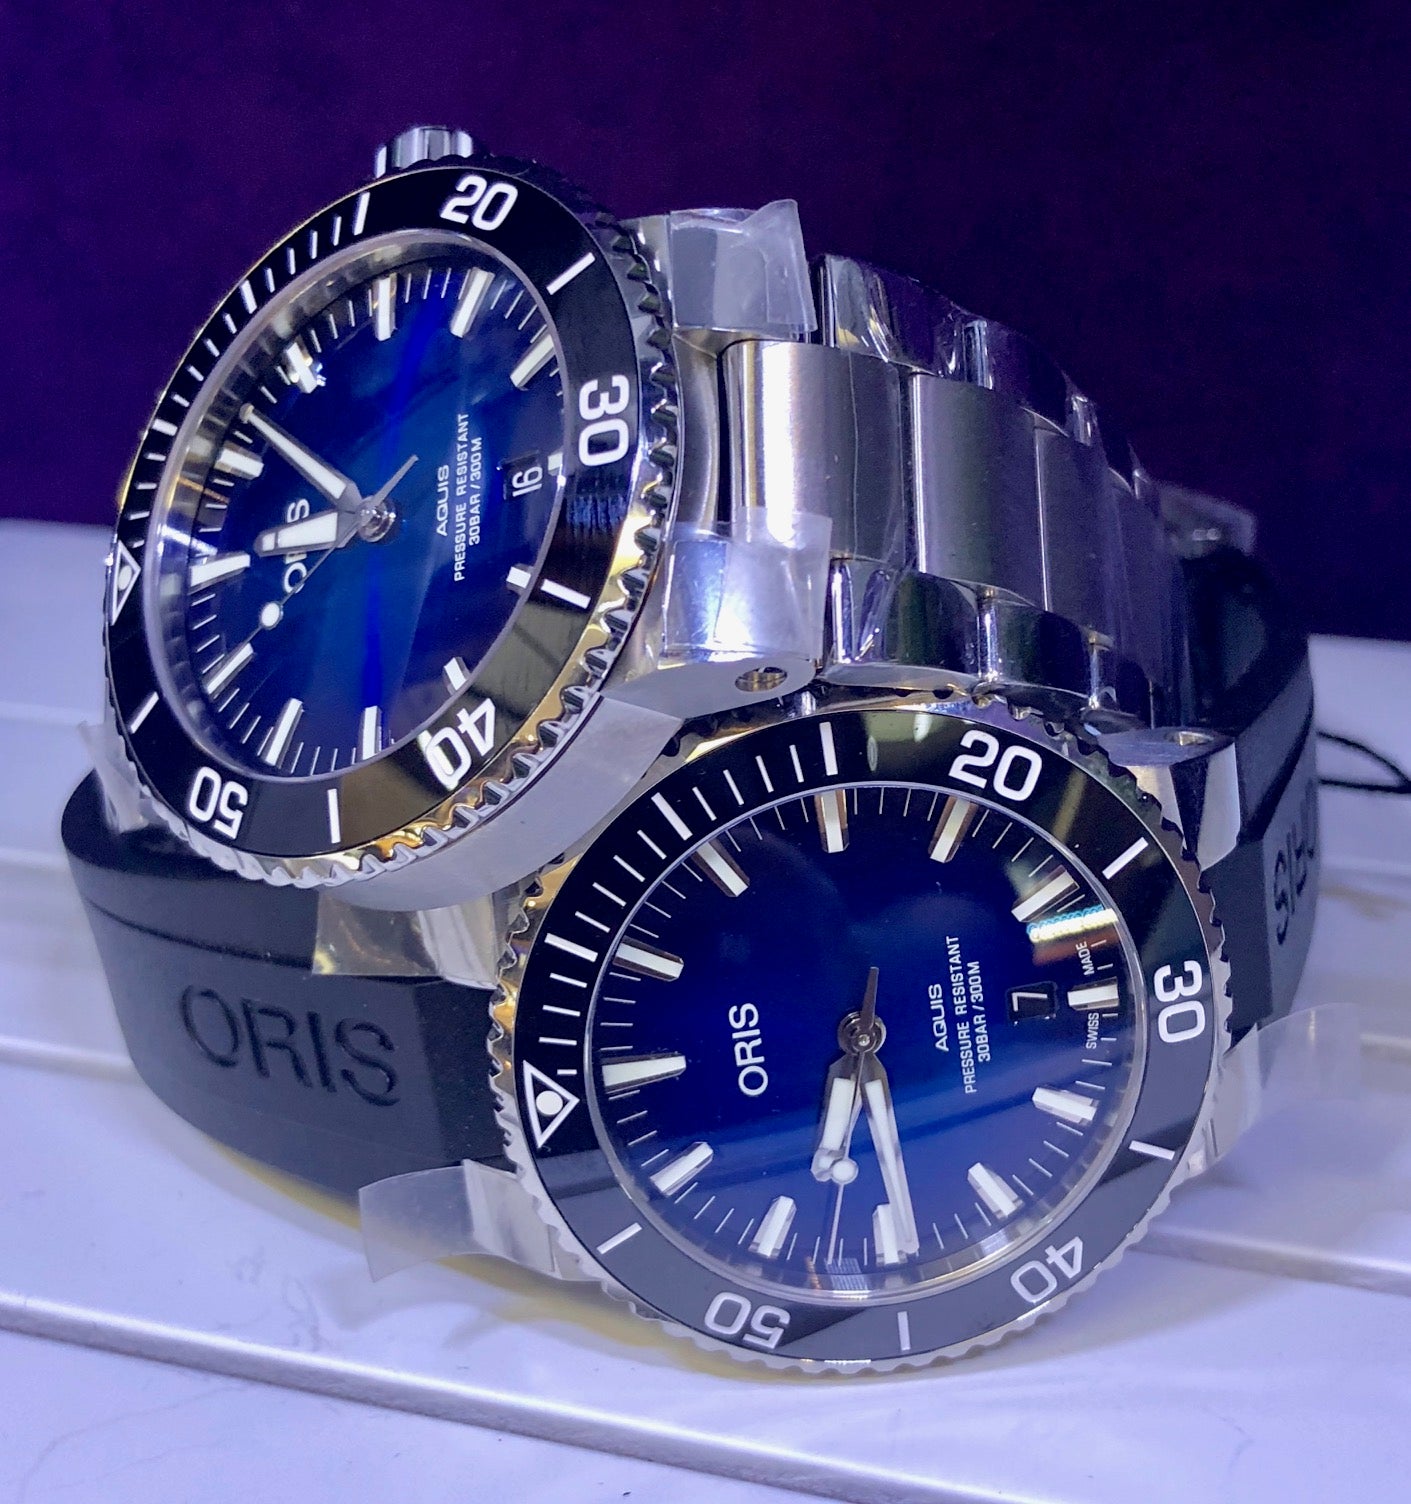 The Oris Clipperton Limited Edition Aquis Dive Watch First Look